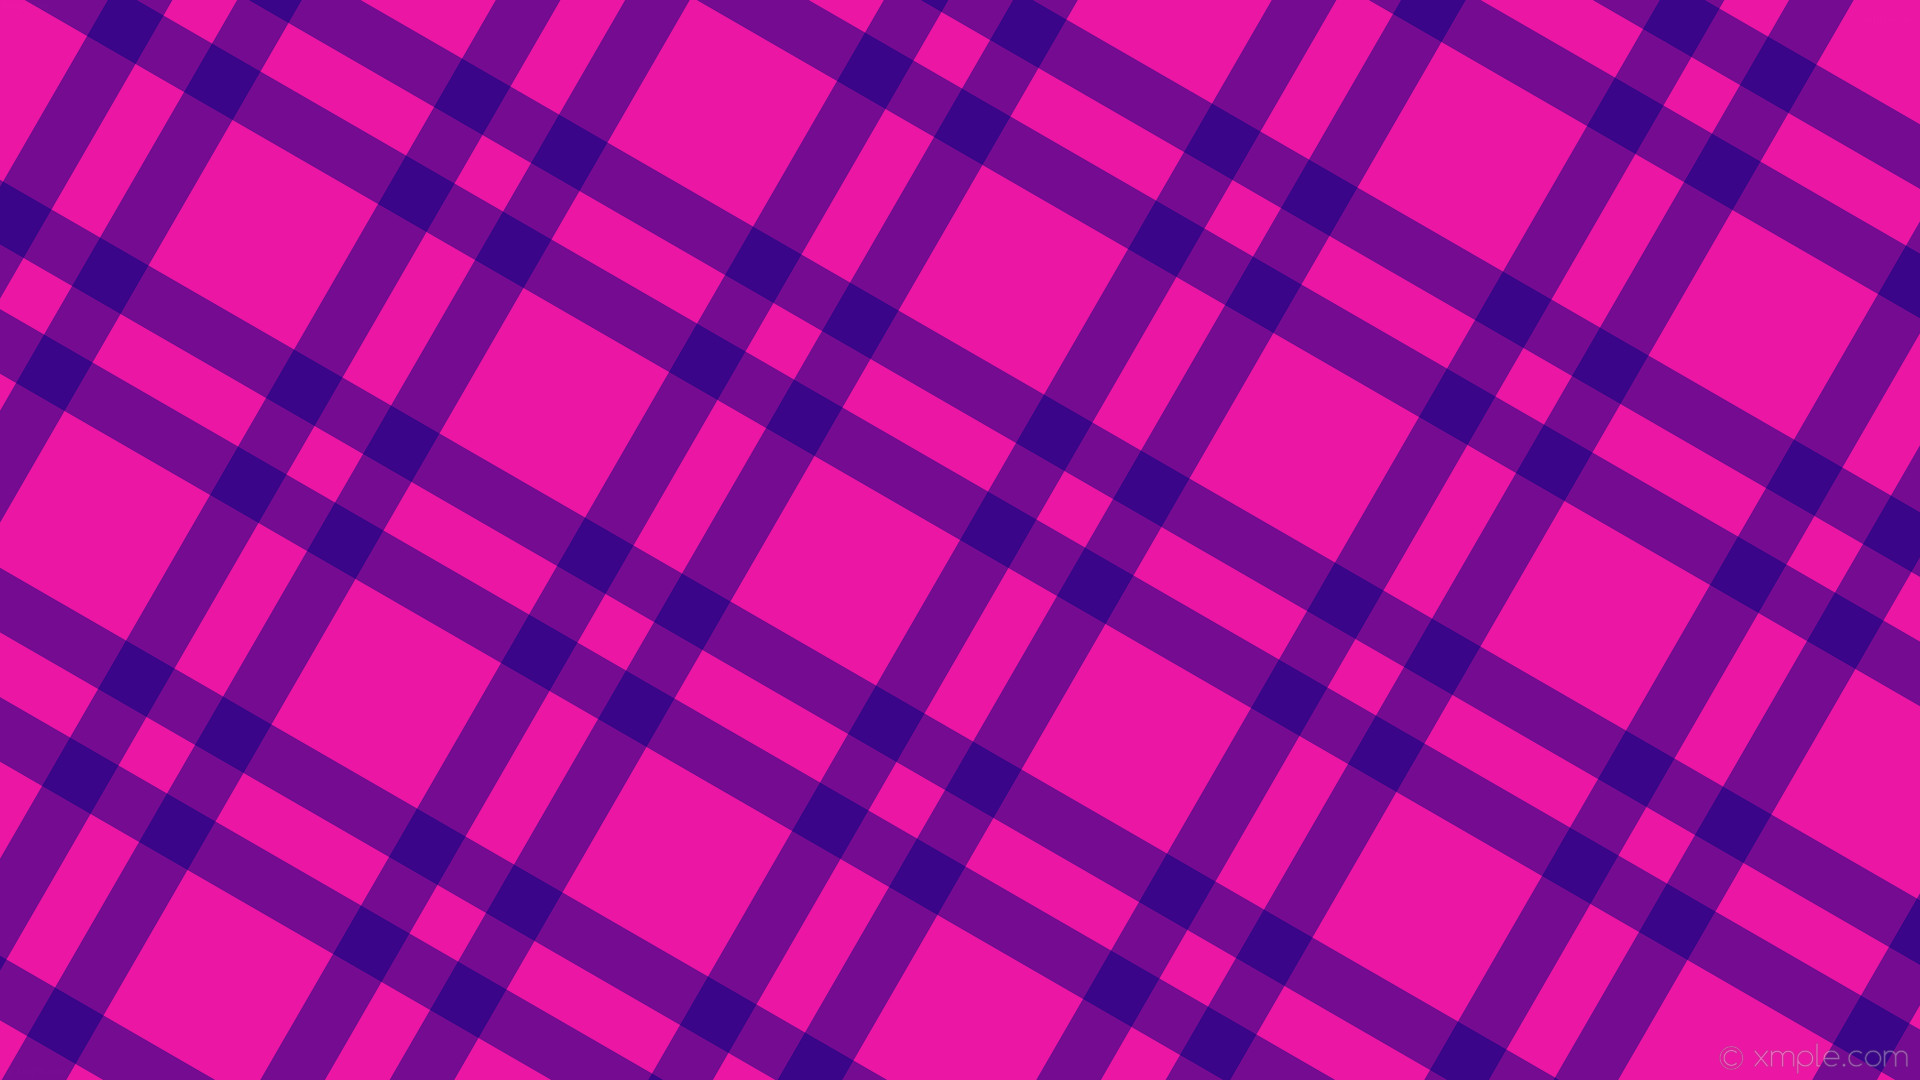 1920x1080 Navy Blue And Pink Striped Wallpaper